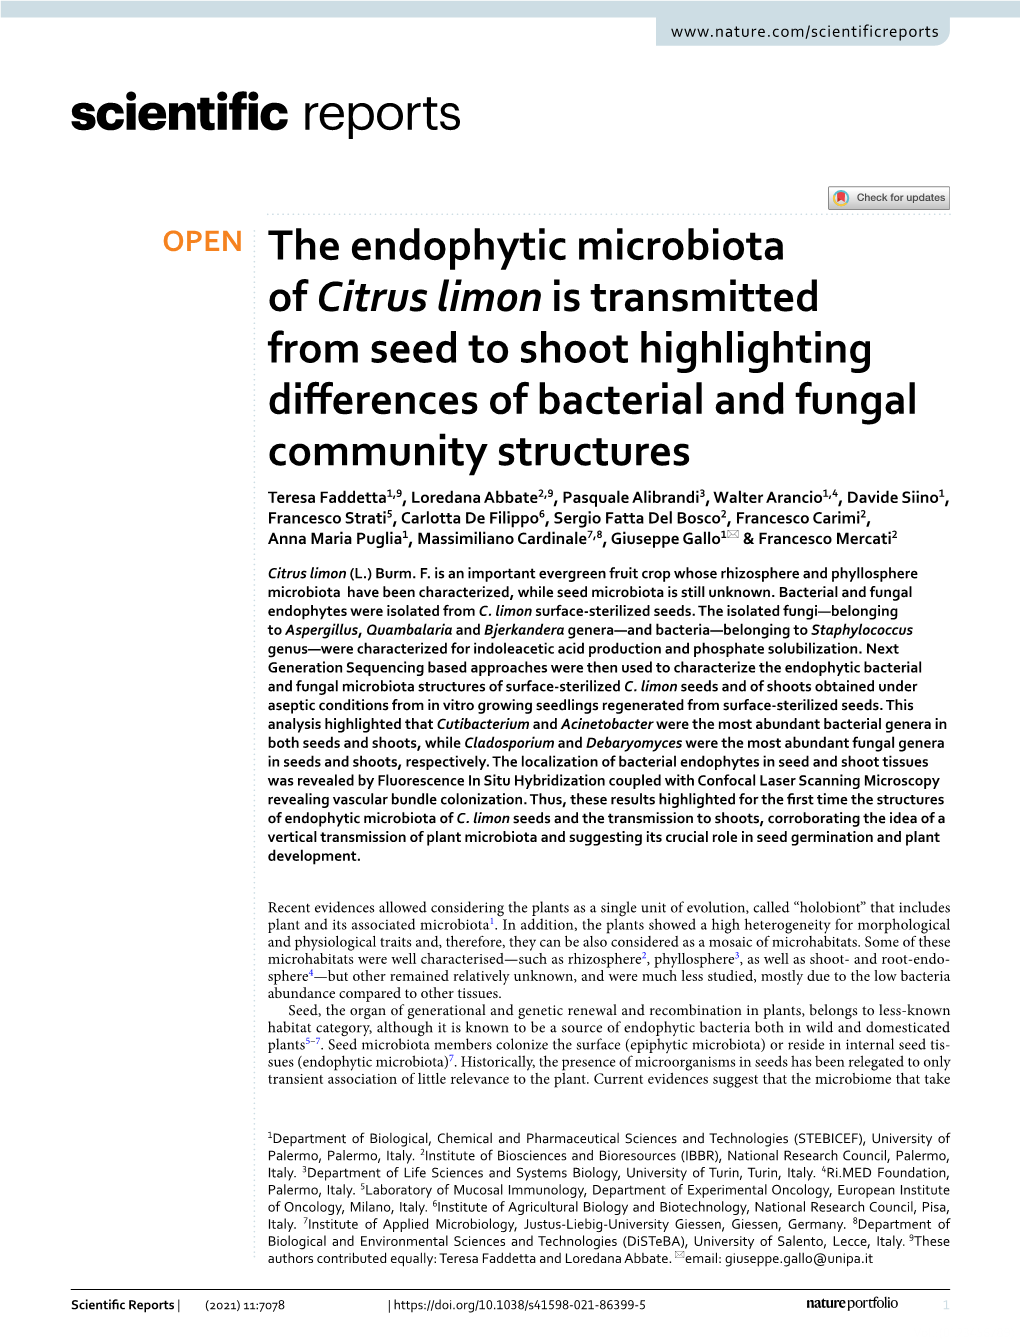 The Endophytic Microbiota of Citrus Limon Is Transmitted from Seed To